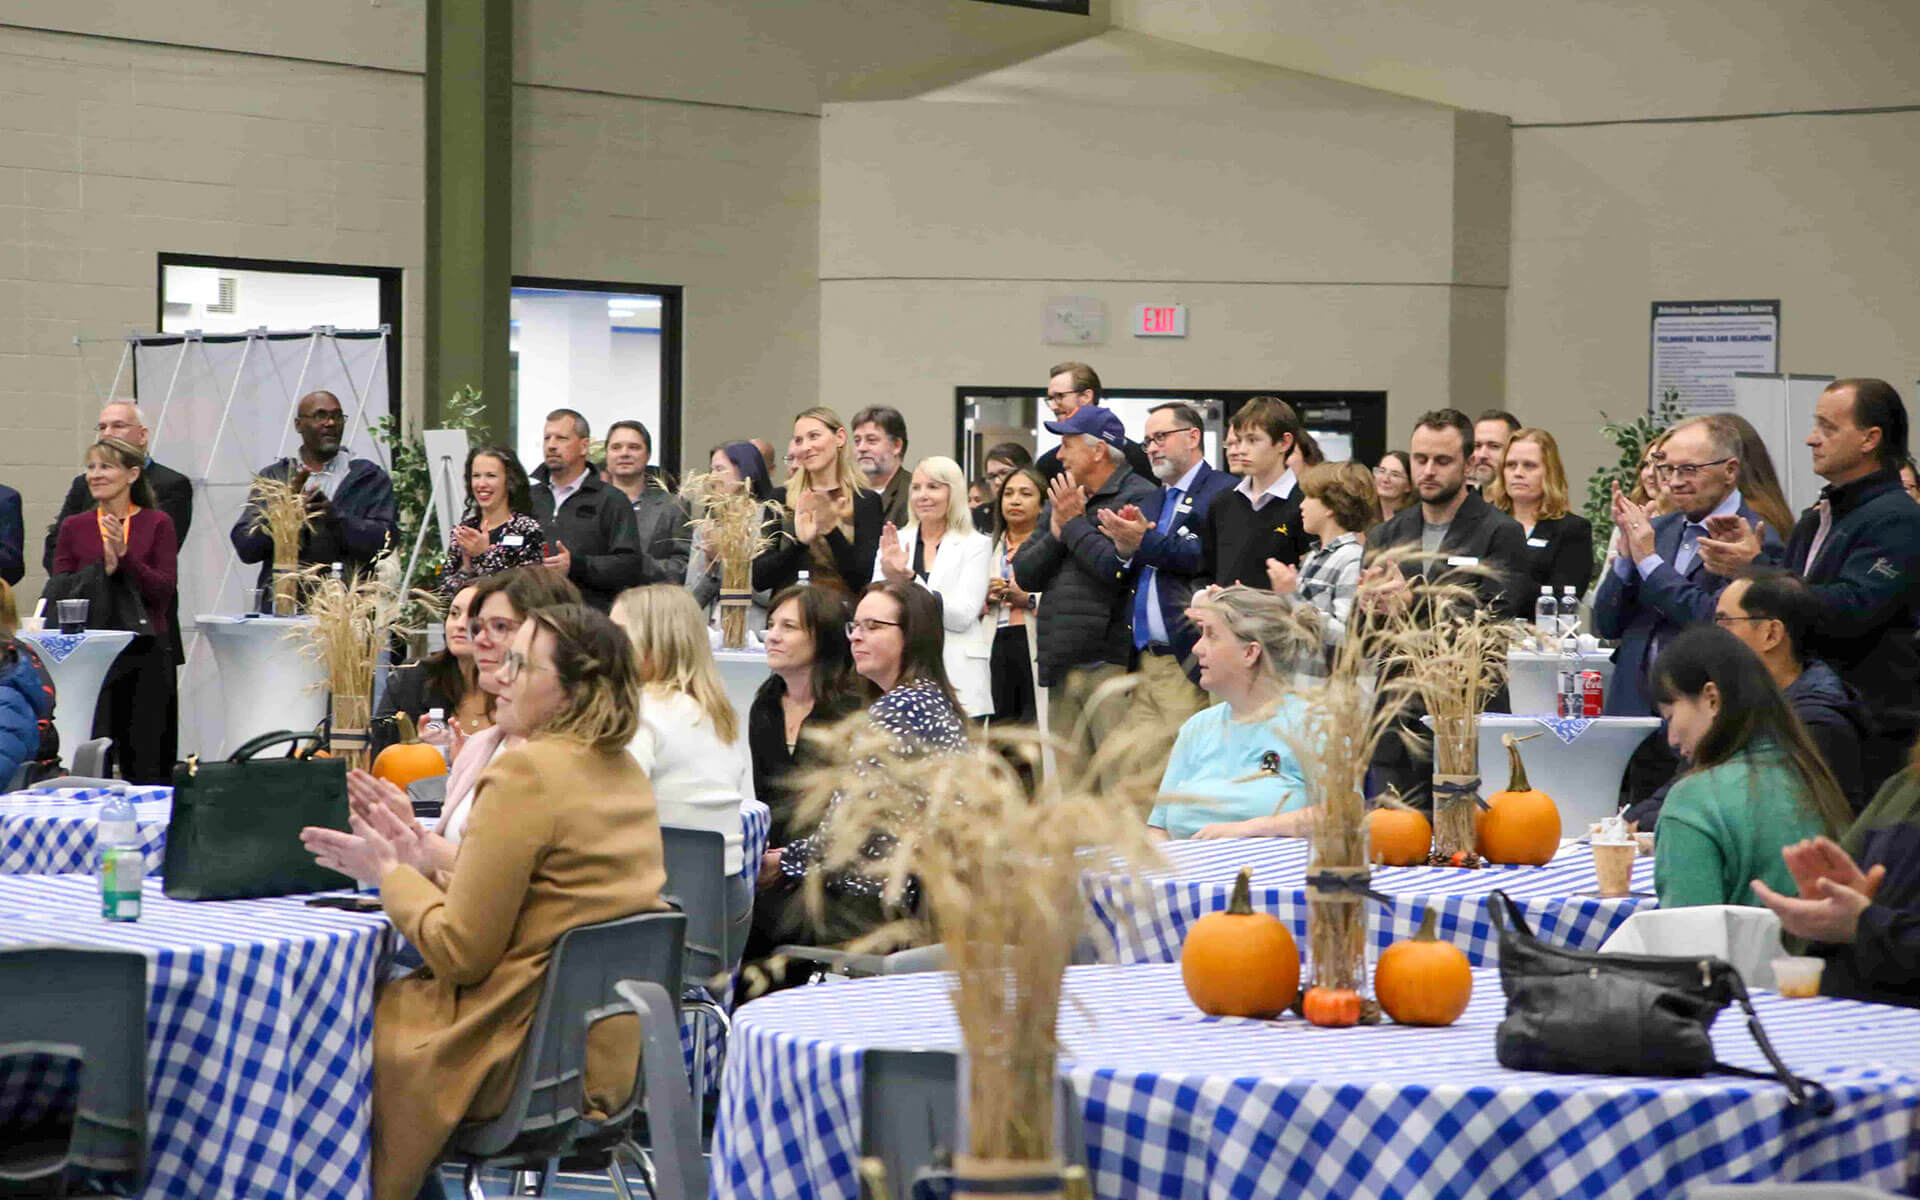 Members of the community gather for a community connection event at the Athabasca Regional Multiplex.